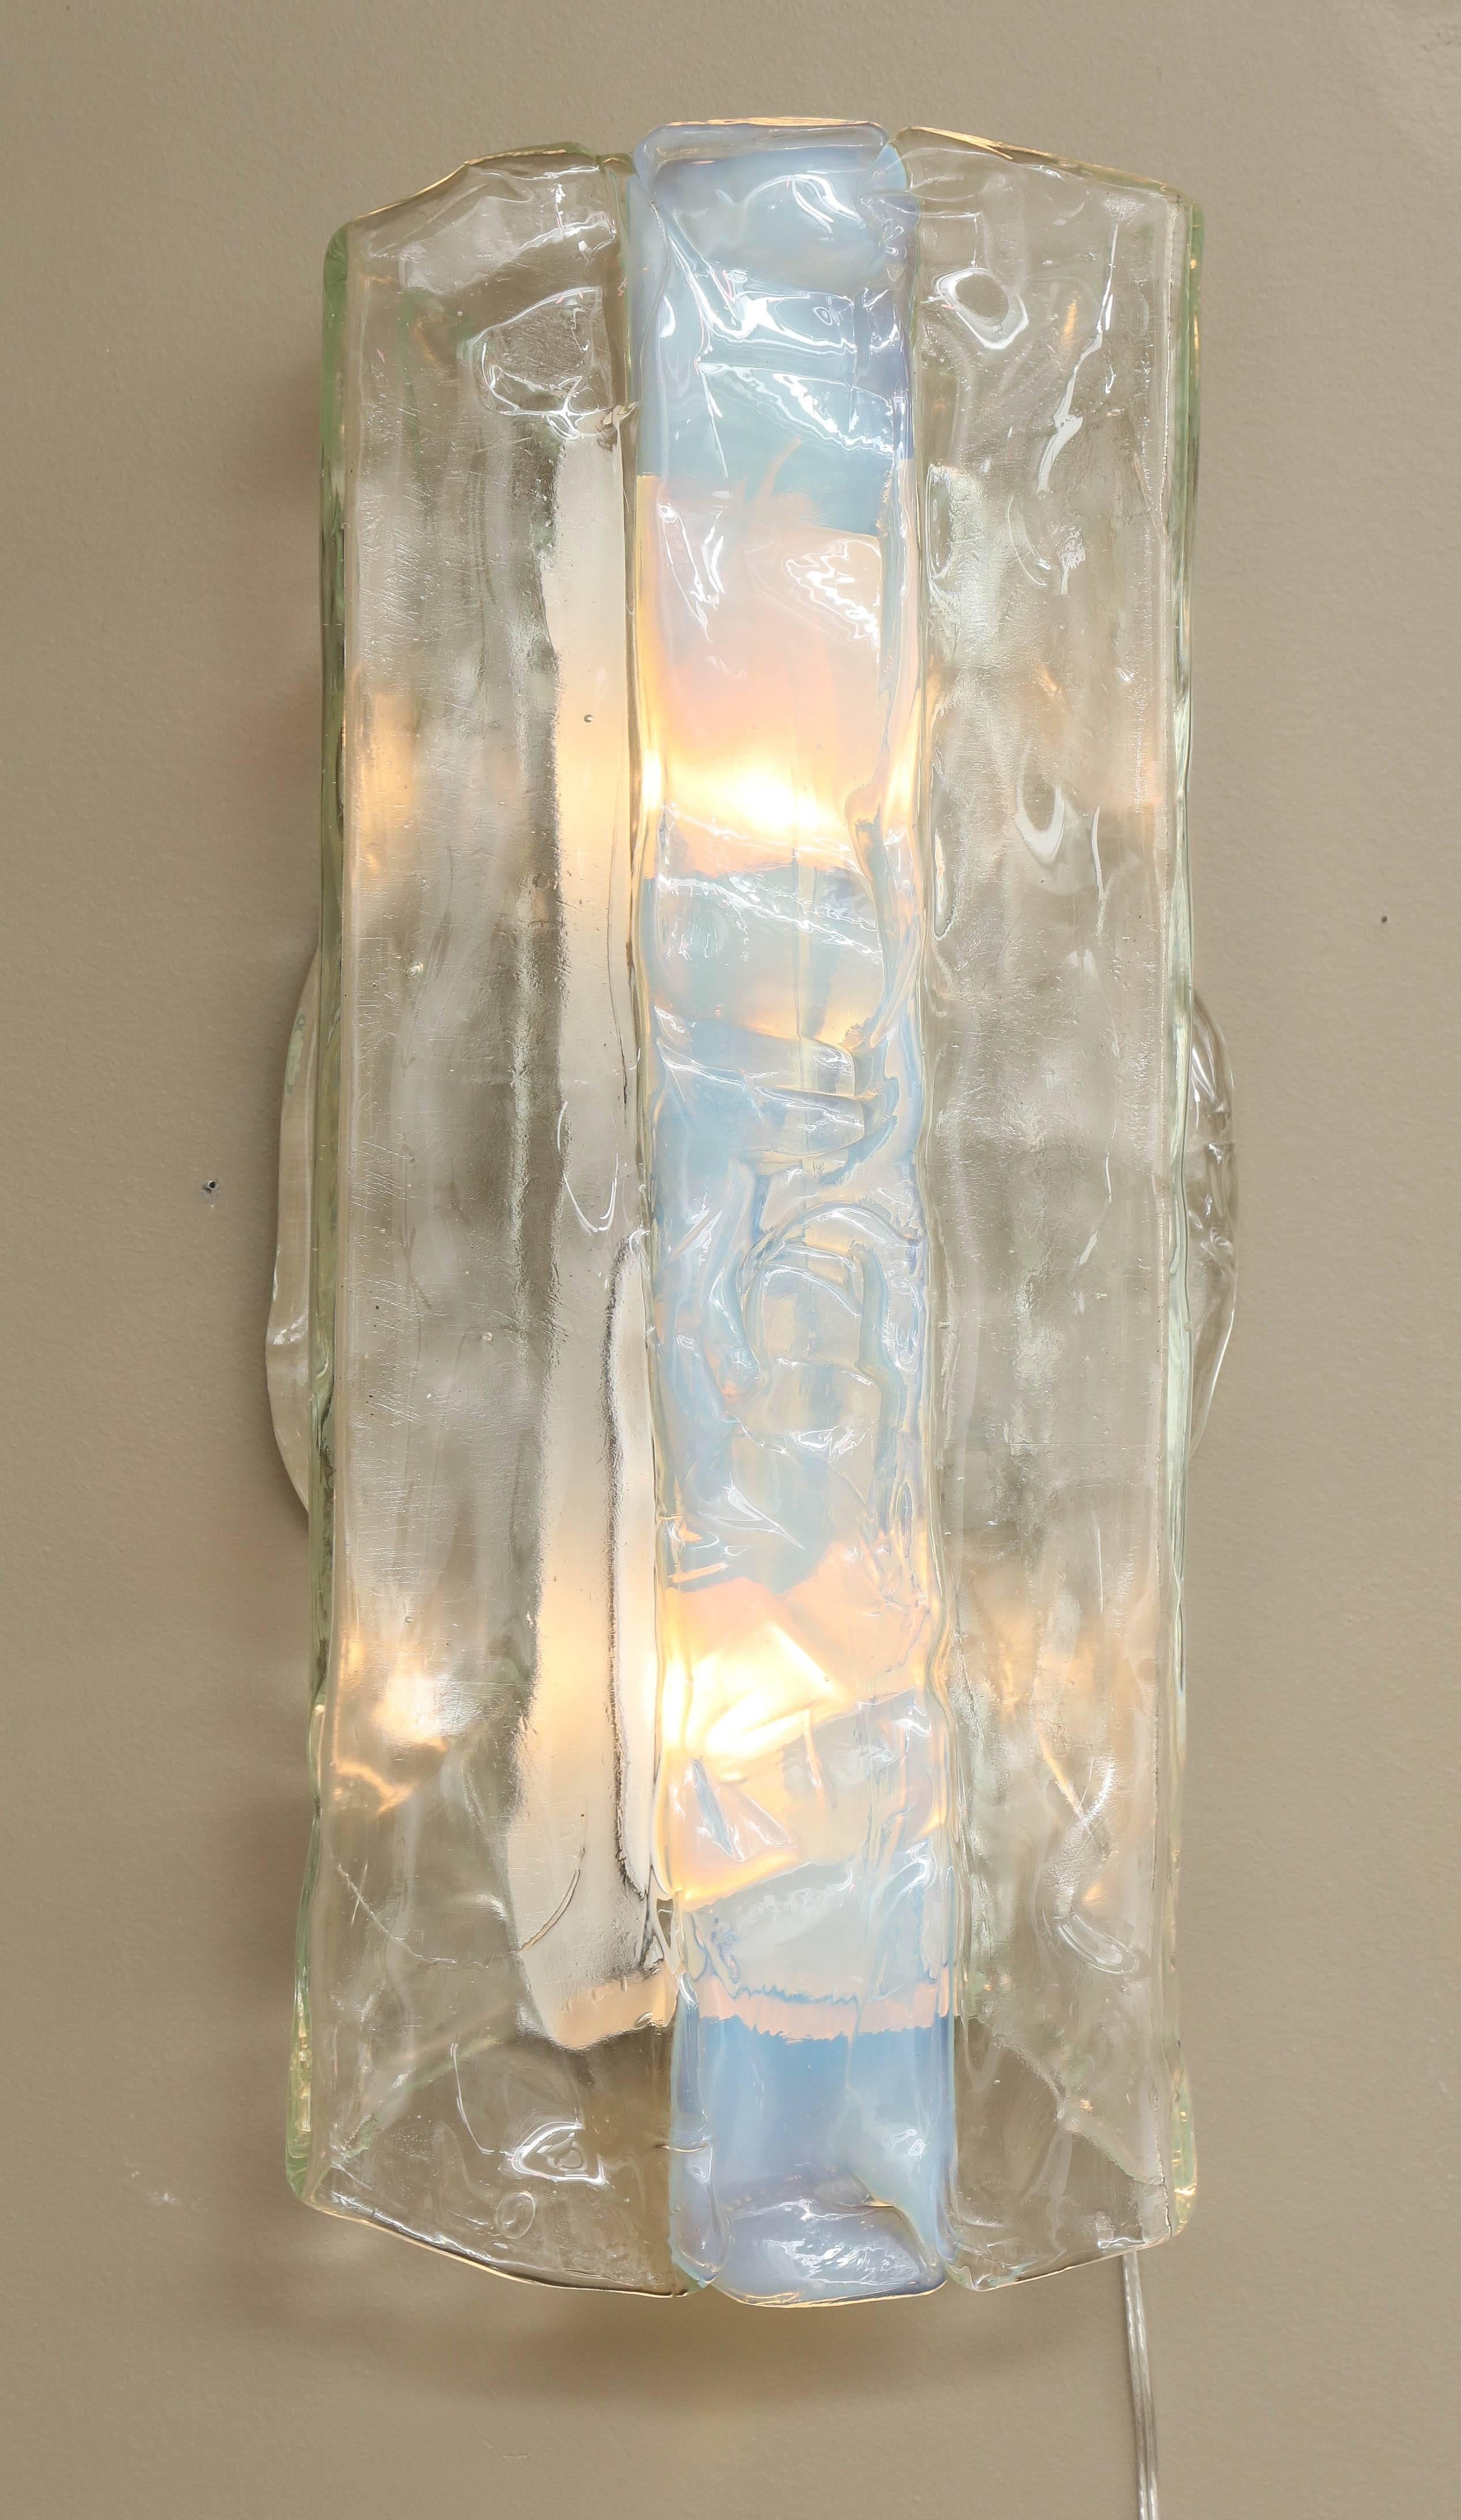 A large circular transparent Murano glass disc ornamented with a single vertical band of opalescent glass is 